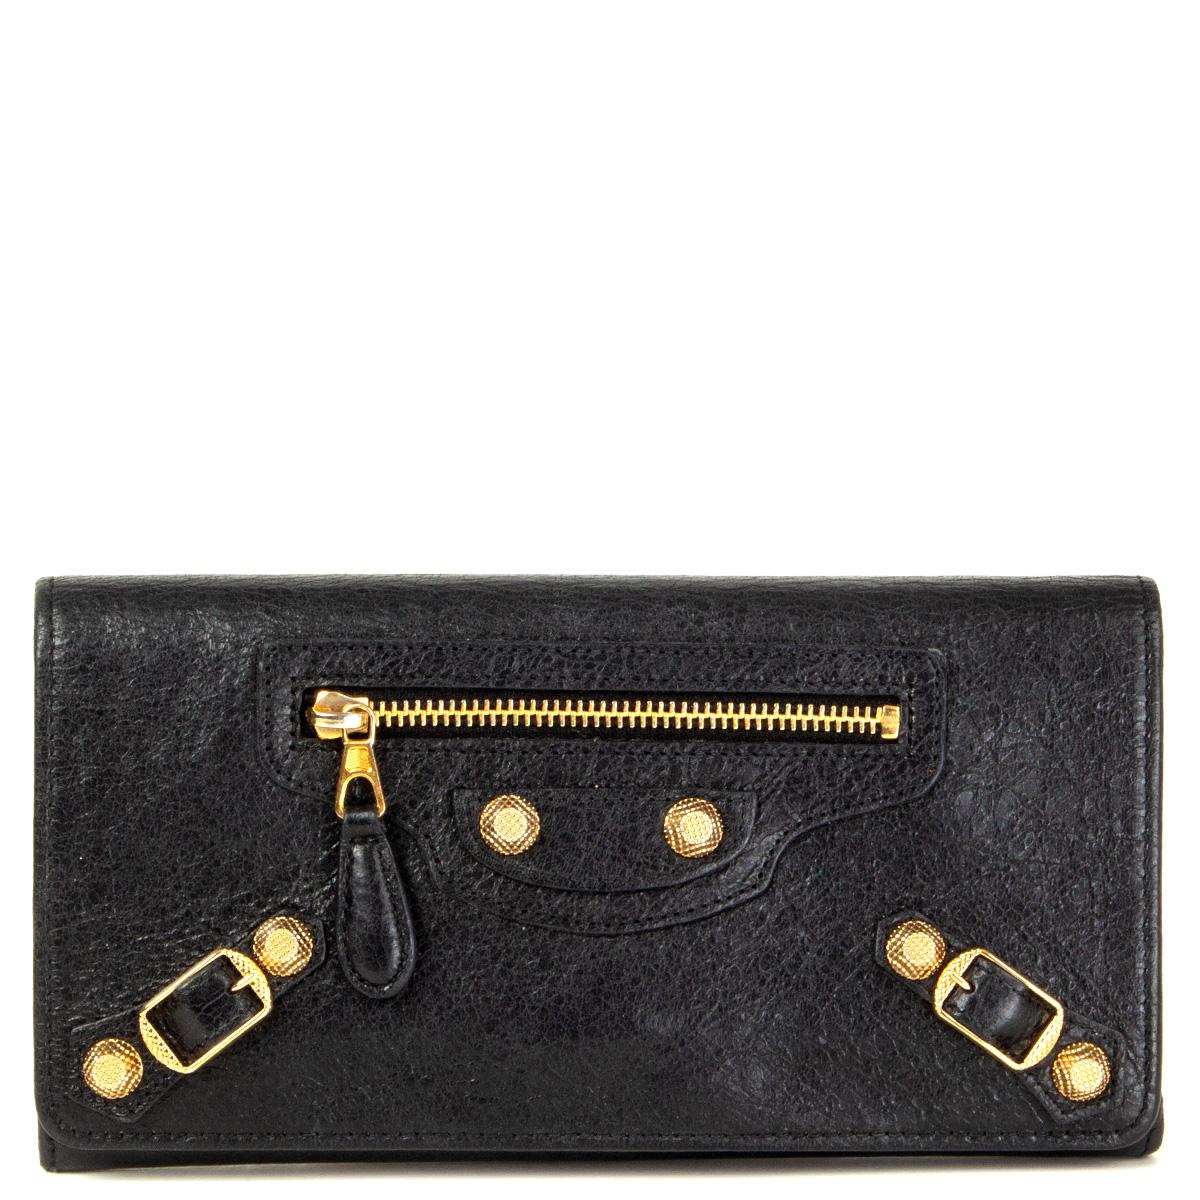 100% authentic Balenciaga 'Giant Money' continental wallet in black distressed leather featuring gold-tone hardware. Opens with a magnetic button under the flap. Lined in black leather and nylon. Divided in three compartments with one big zipped